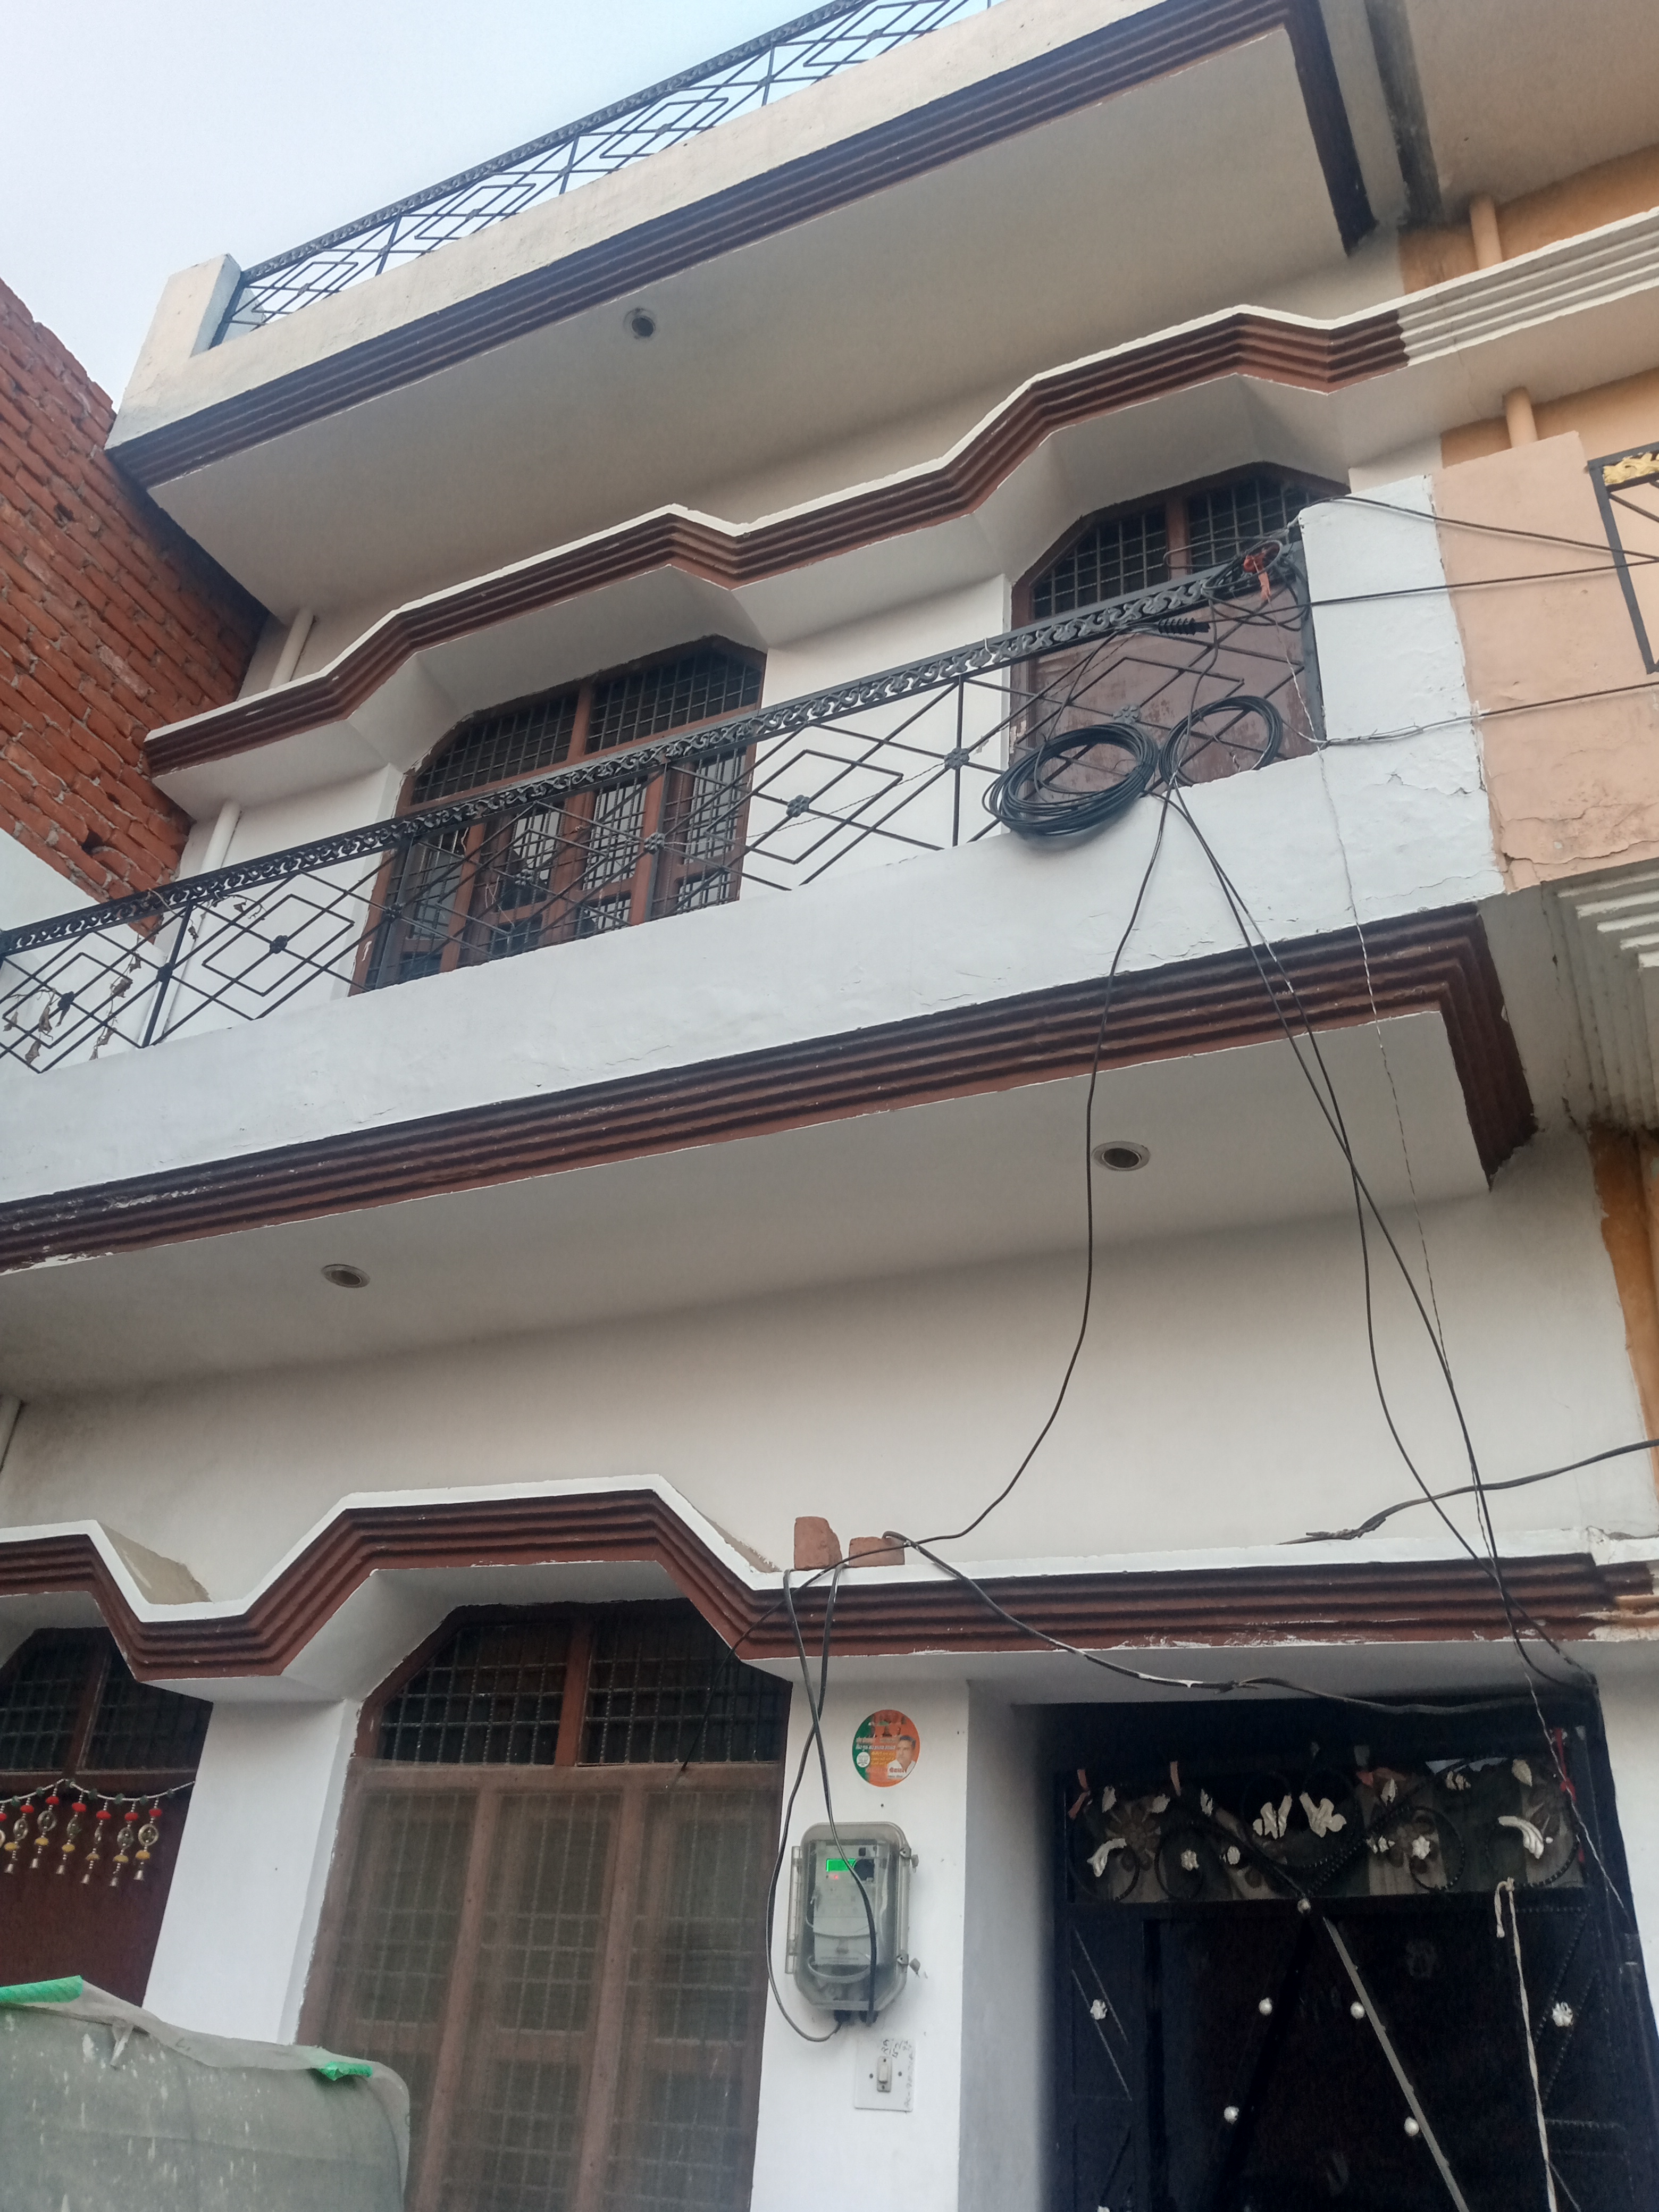 House for sale in balaganj 